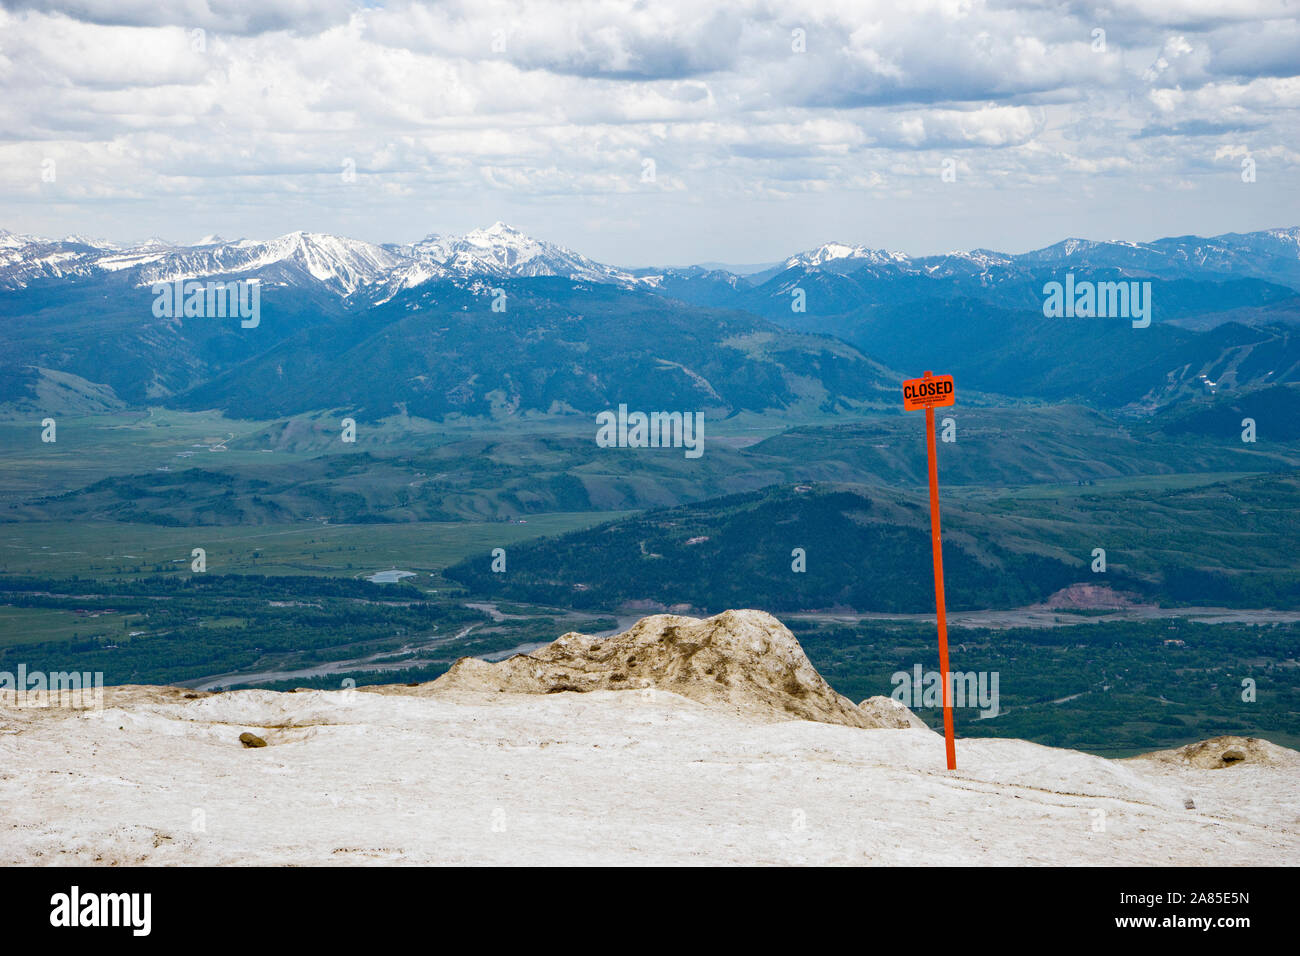 Closed sign in the snow at Rendezvous Peak, Jackson Hole valley below Stock Photo